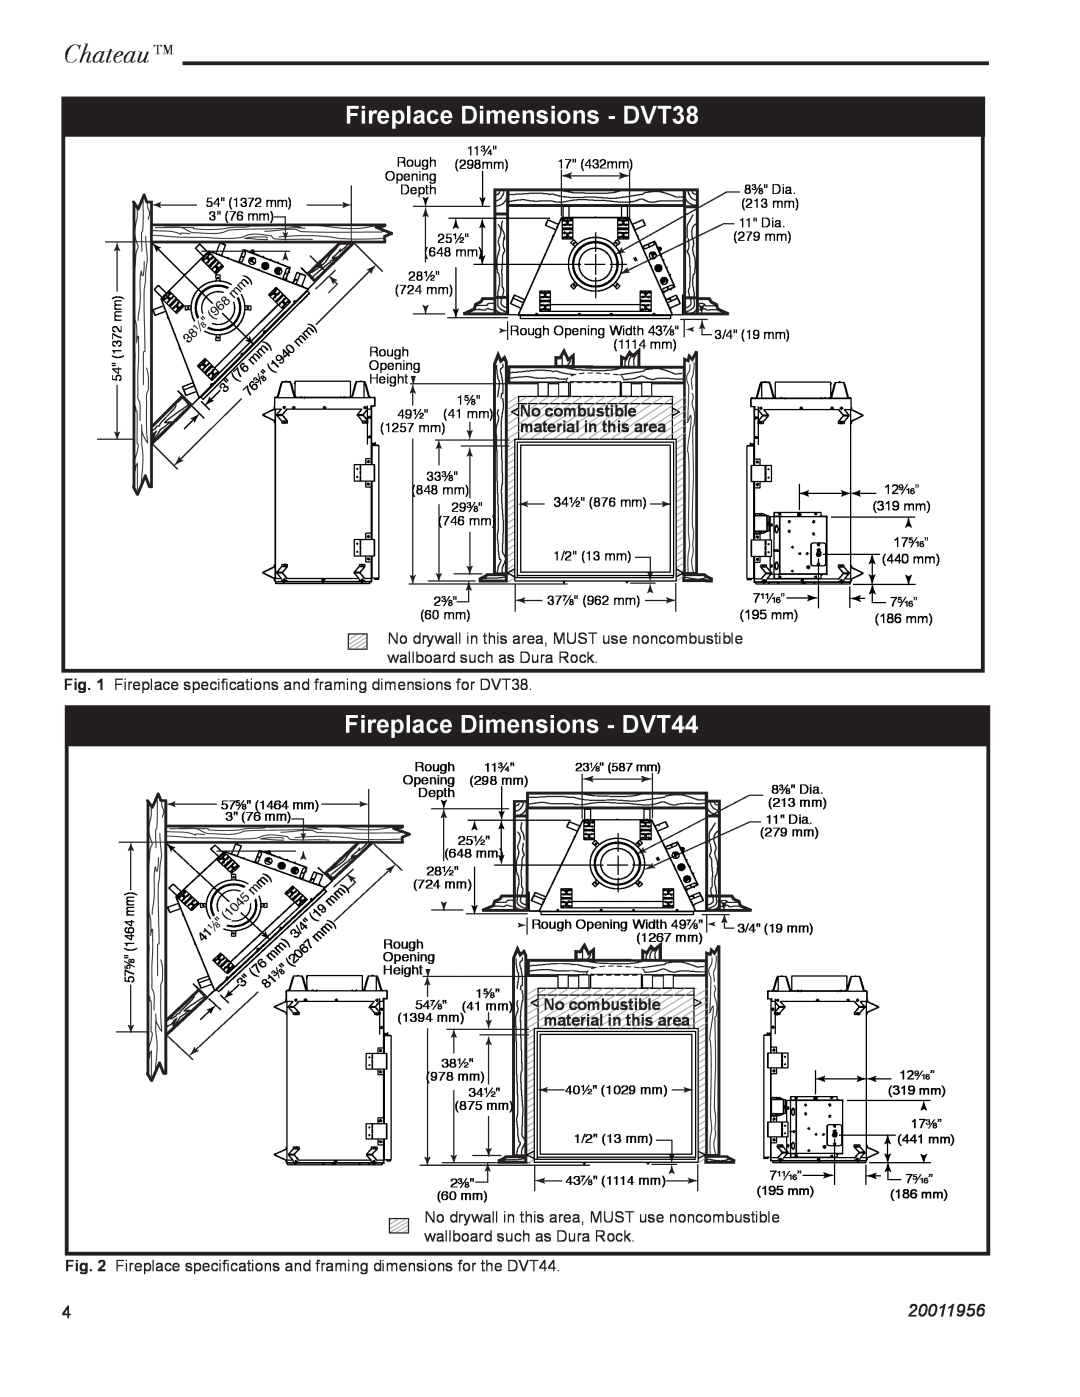 Vermont Casting Chateau, Fireplace Dimensions - DVT38, Fireplace Dimensions - DVT44, 20011956, No combustible 